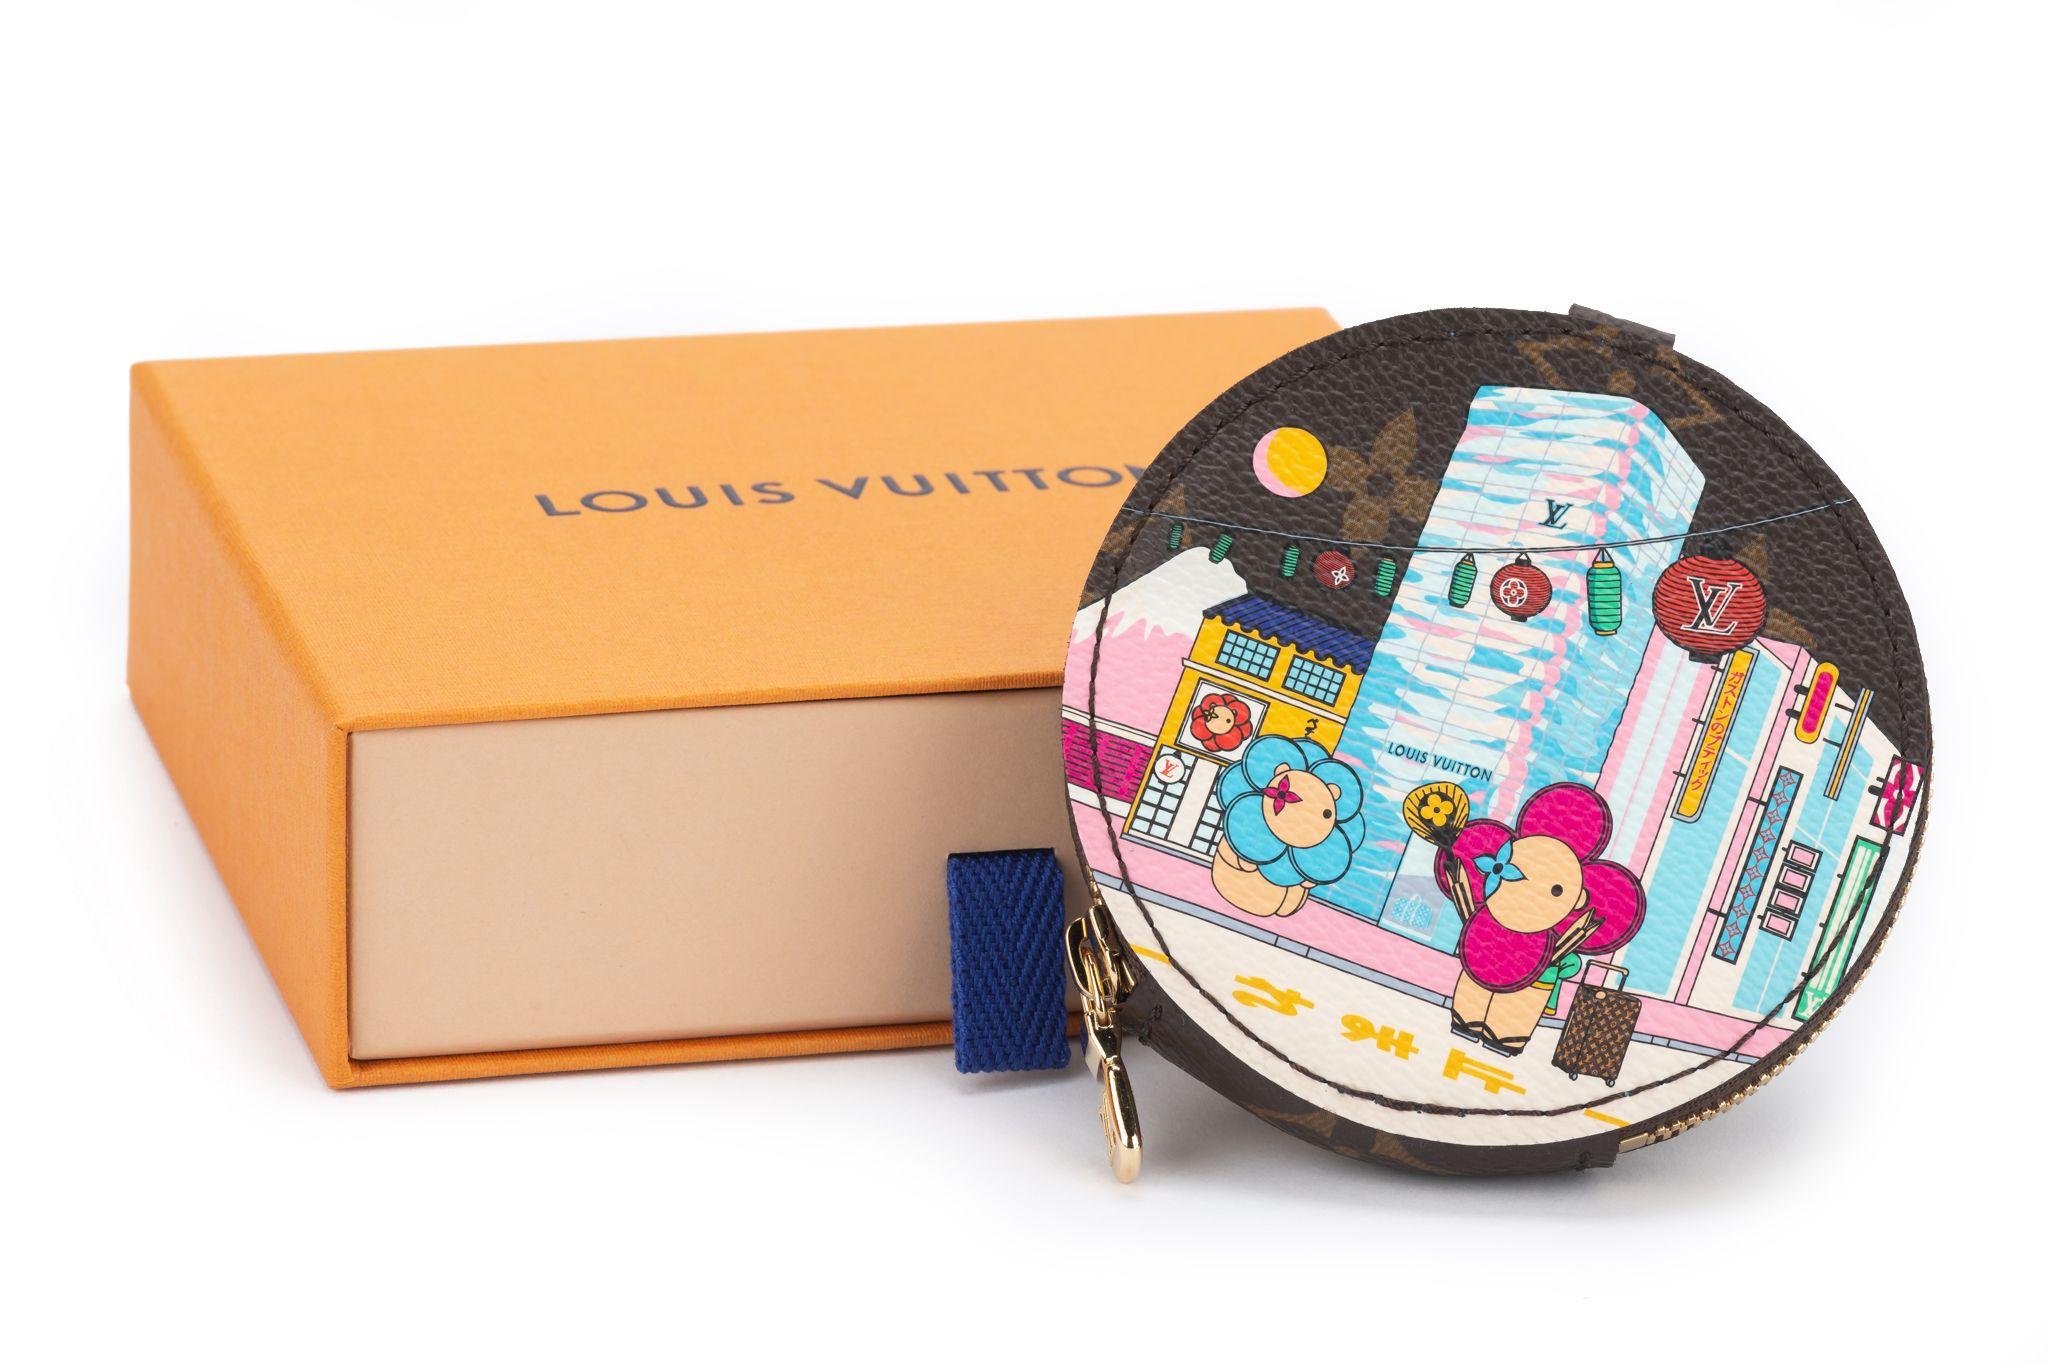 Louis Vuitton round coin purse which belongs to the Vivienne Holiday Collection 2022. In a tribute to Japan, an exclusive print shows Louis Vuitton mascot Vivienne in front of the Tokyo boutique. The item is new and comes with the box and dustcover.